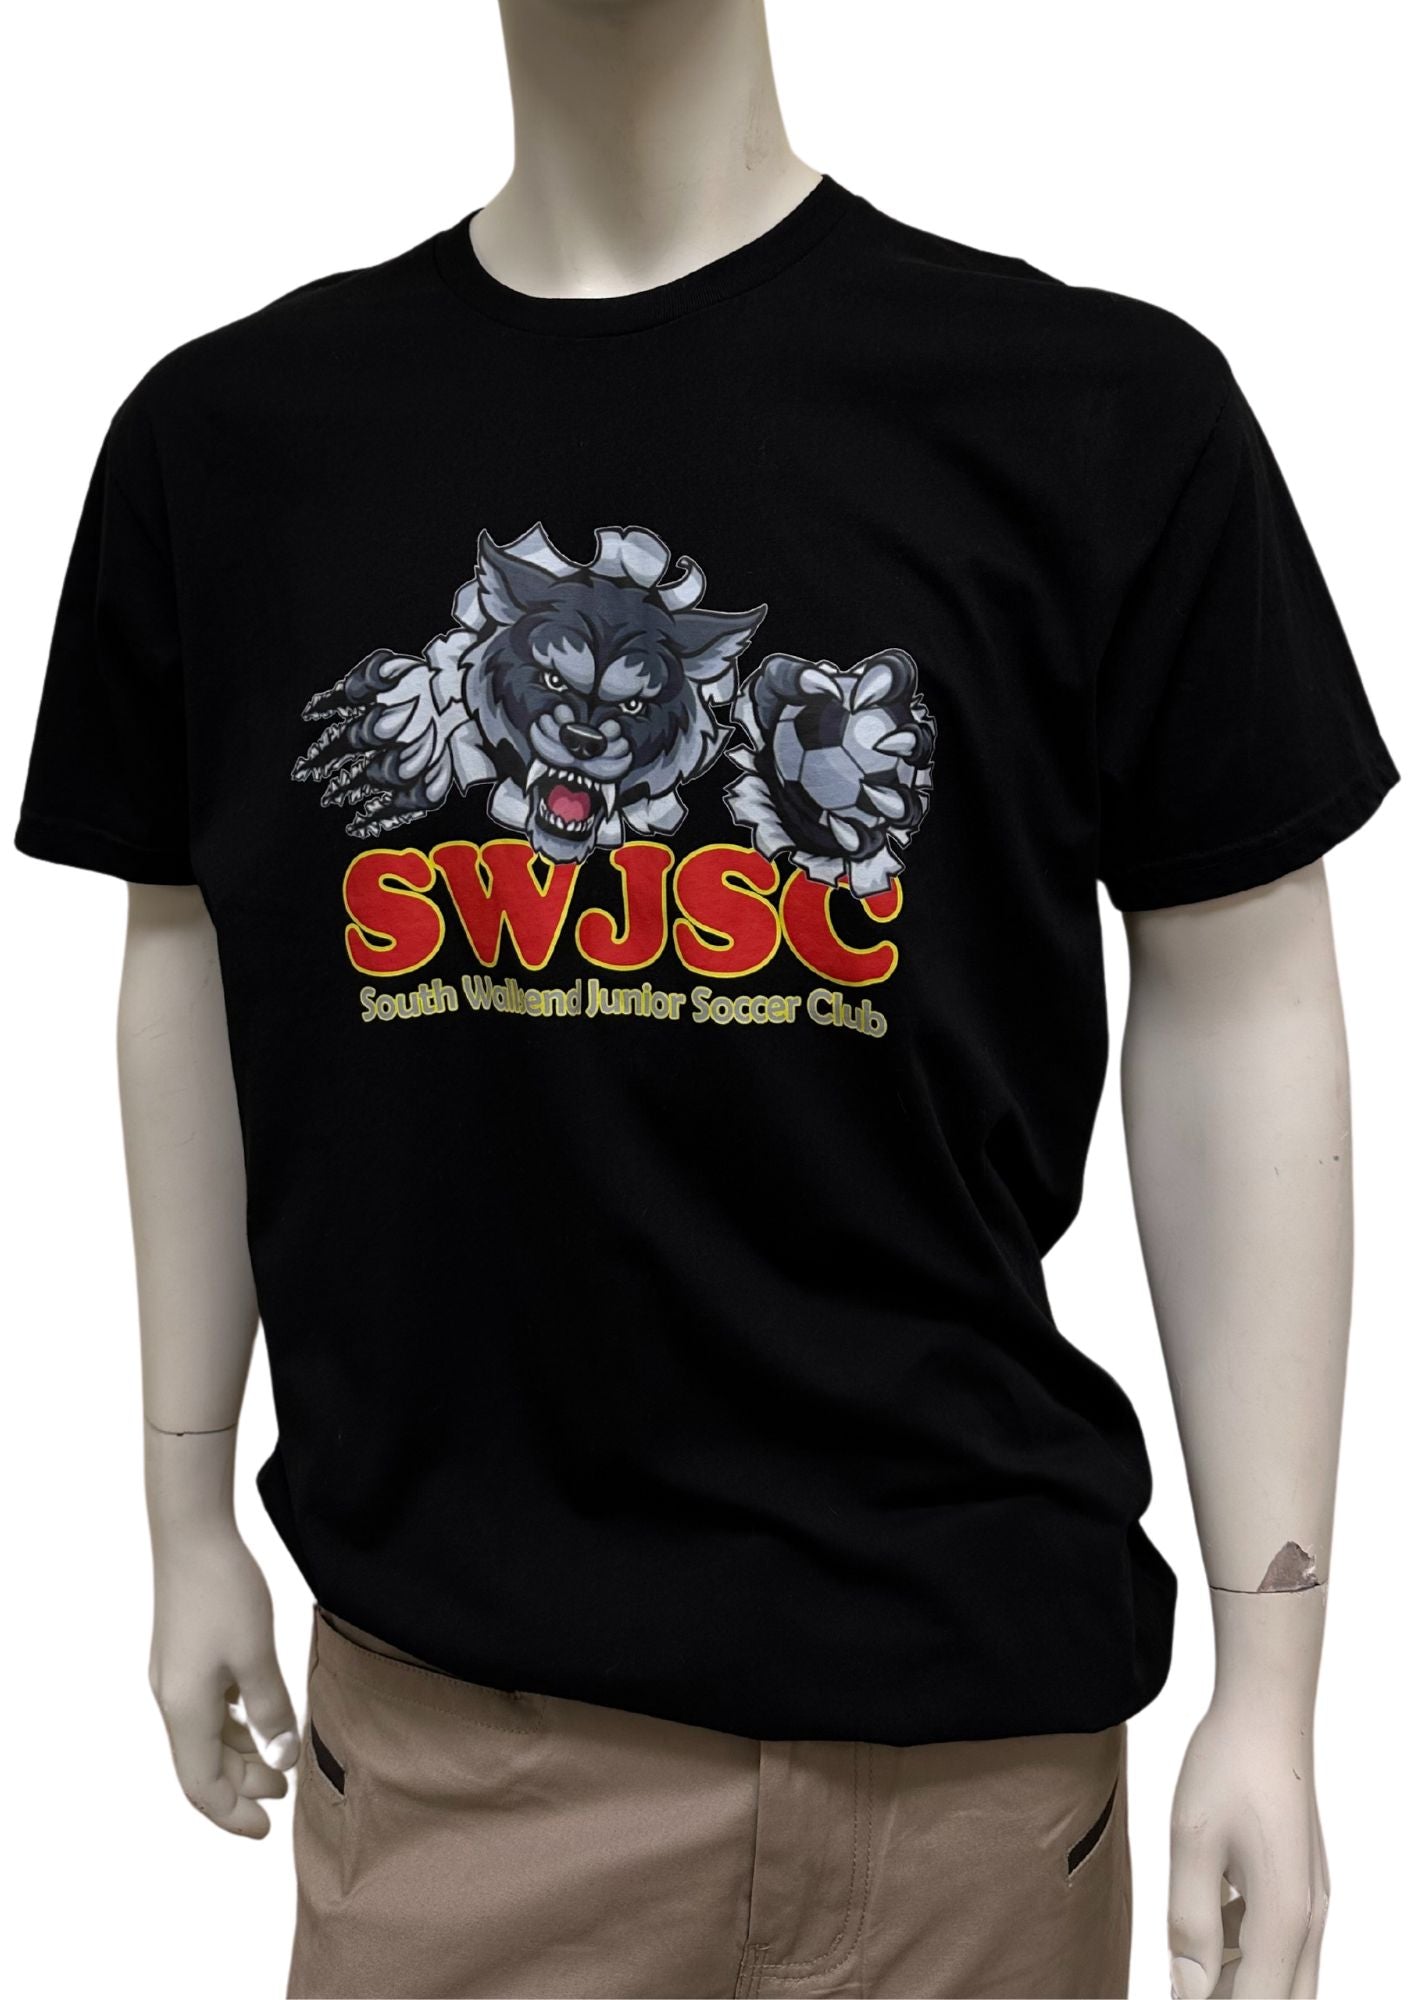 SWJSC Supporters Tee